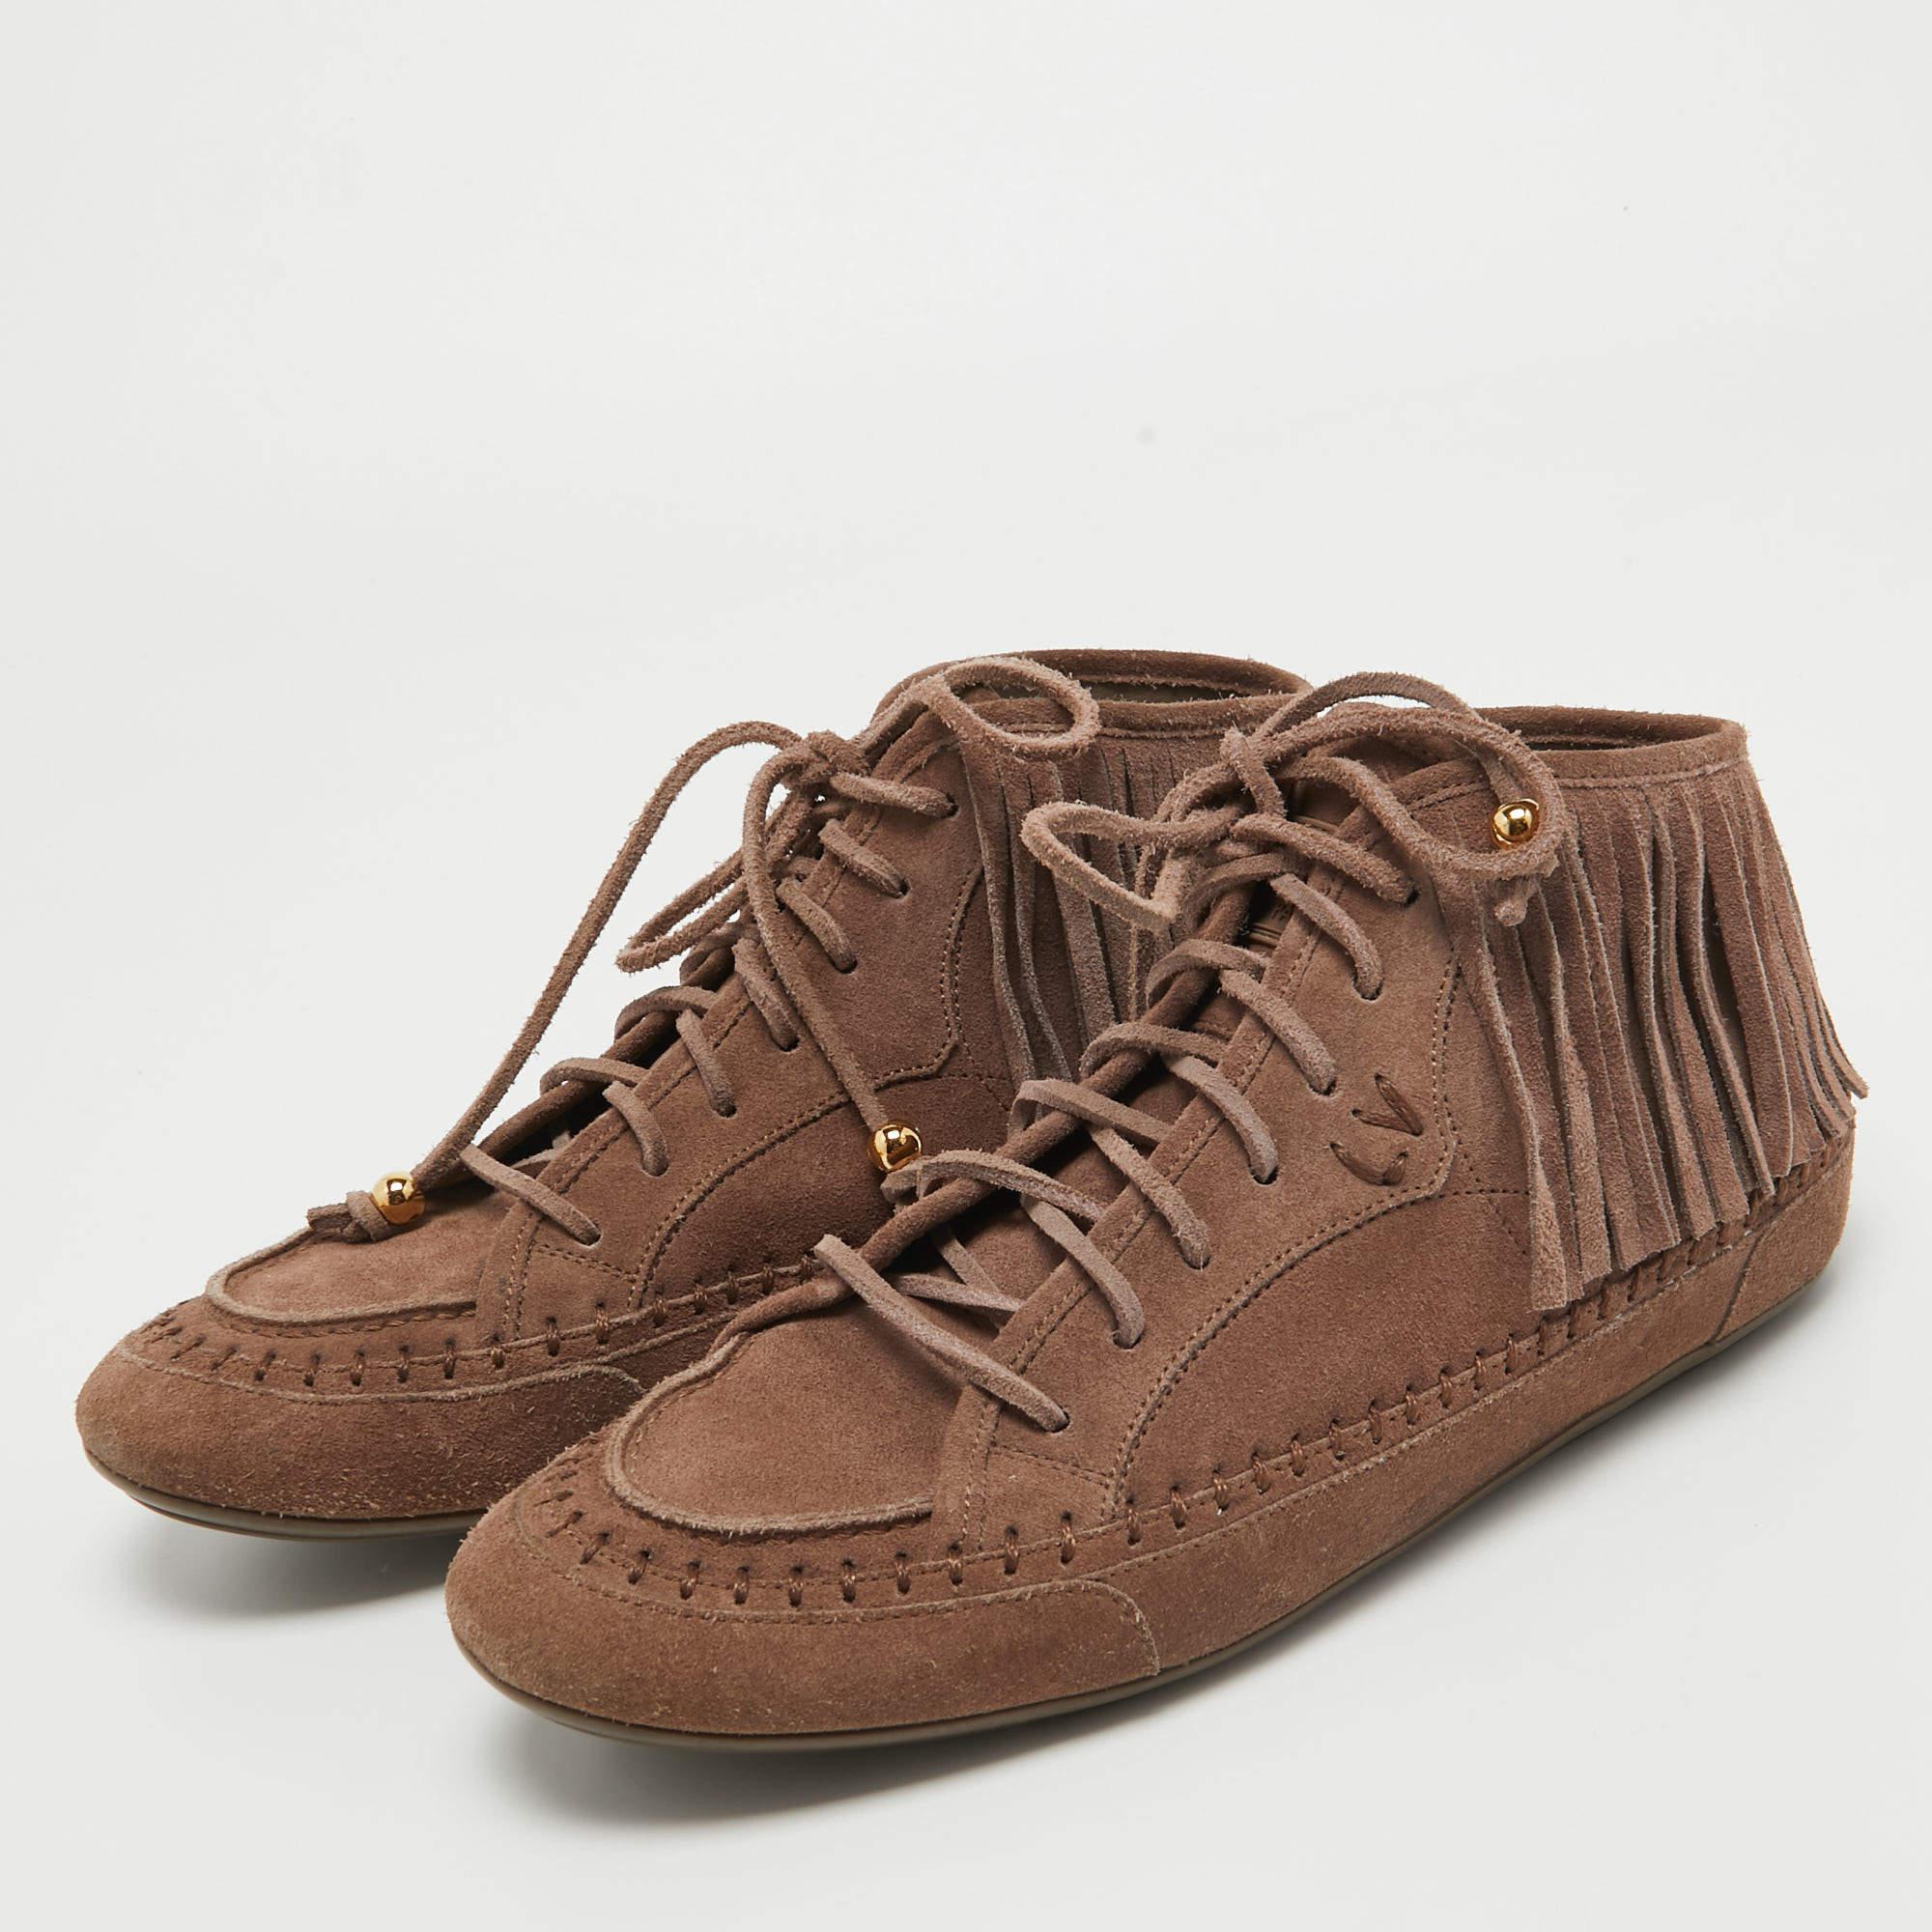 Louis Vuitton Brown Suede Fringe Details High Sneakers Size 39 For Sale 4